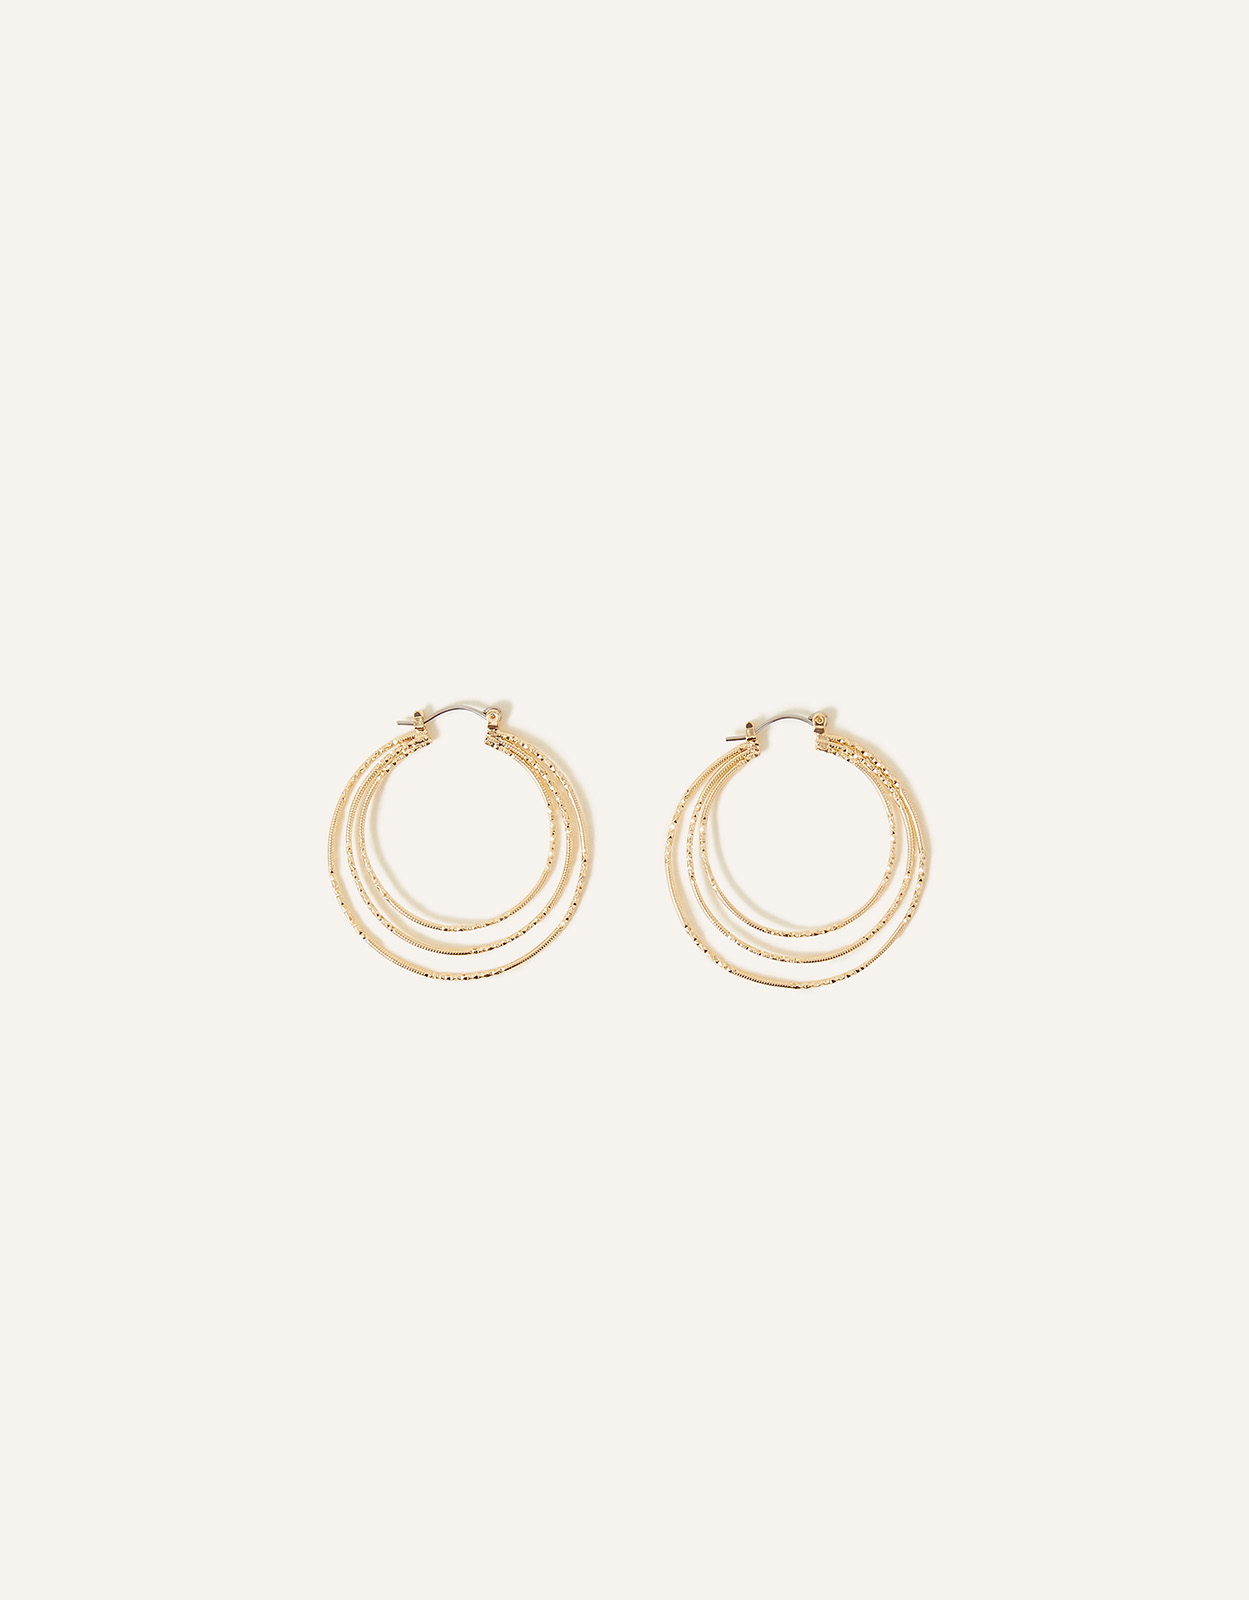 Accessorize Women's Delicate Layered Hoops, Size: 5cm